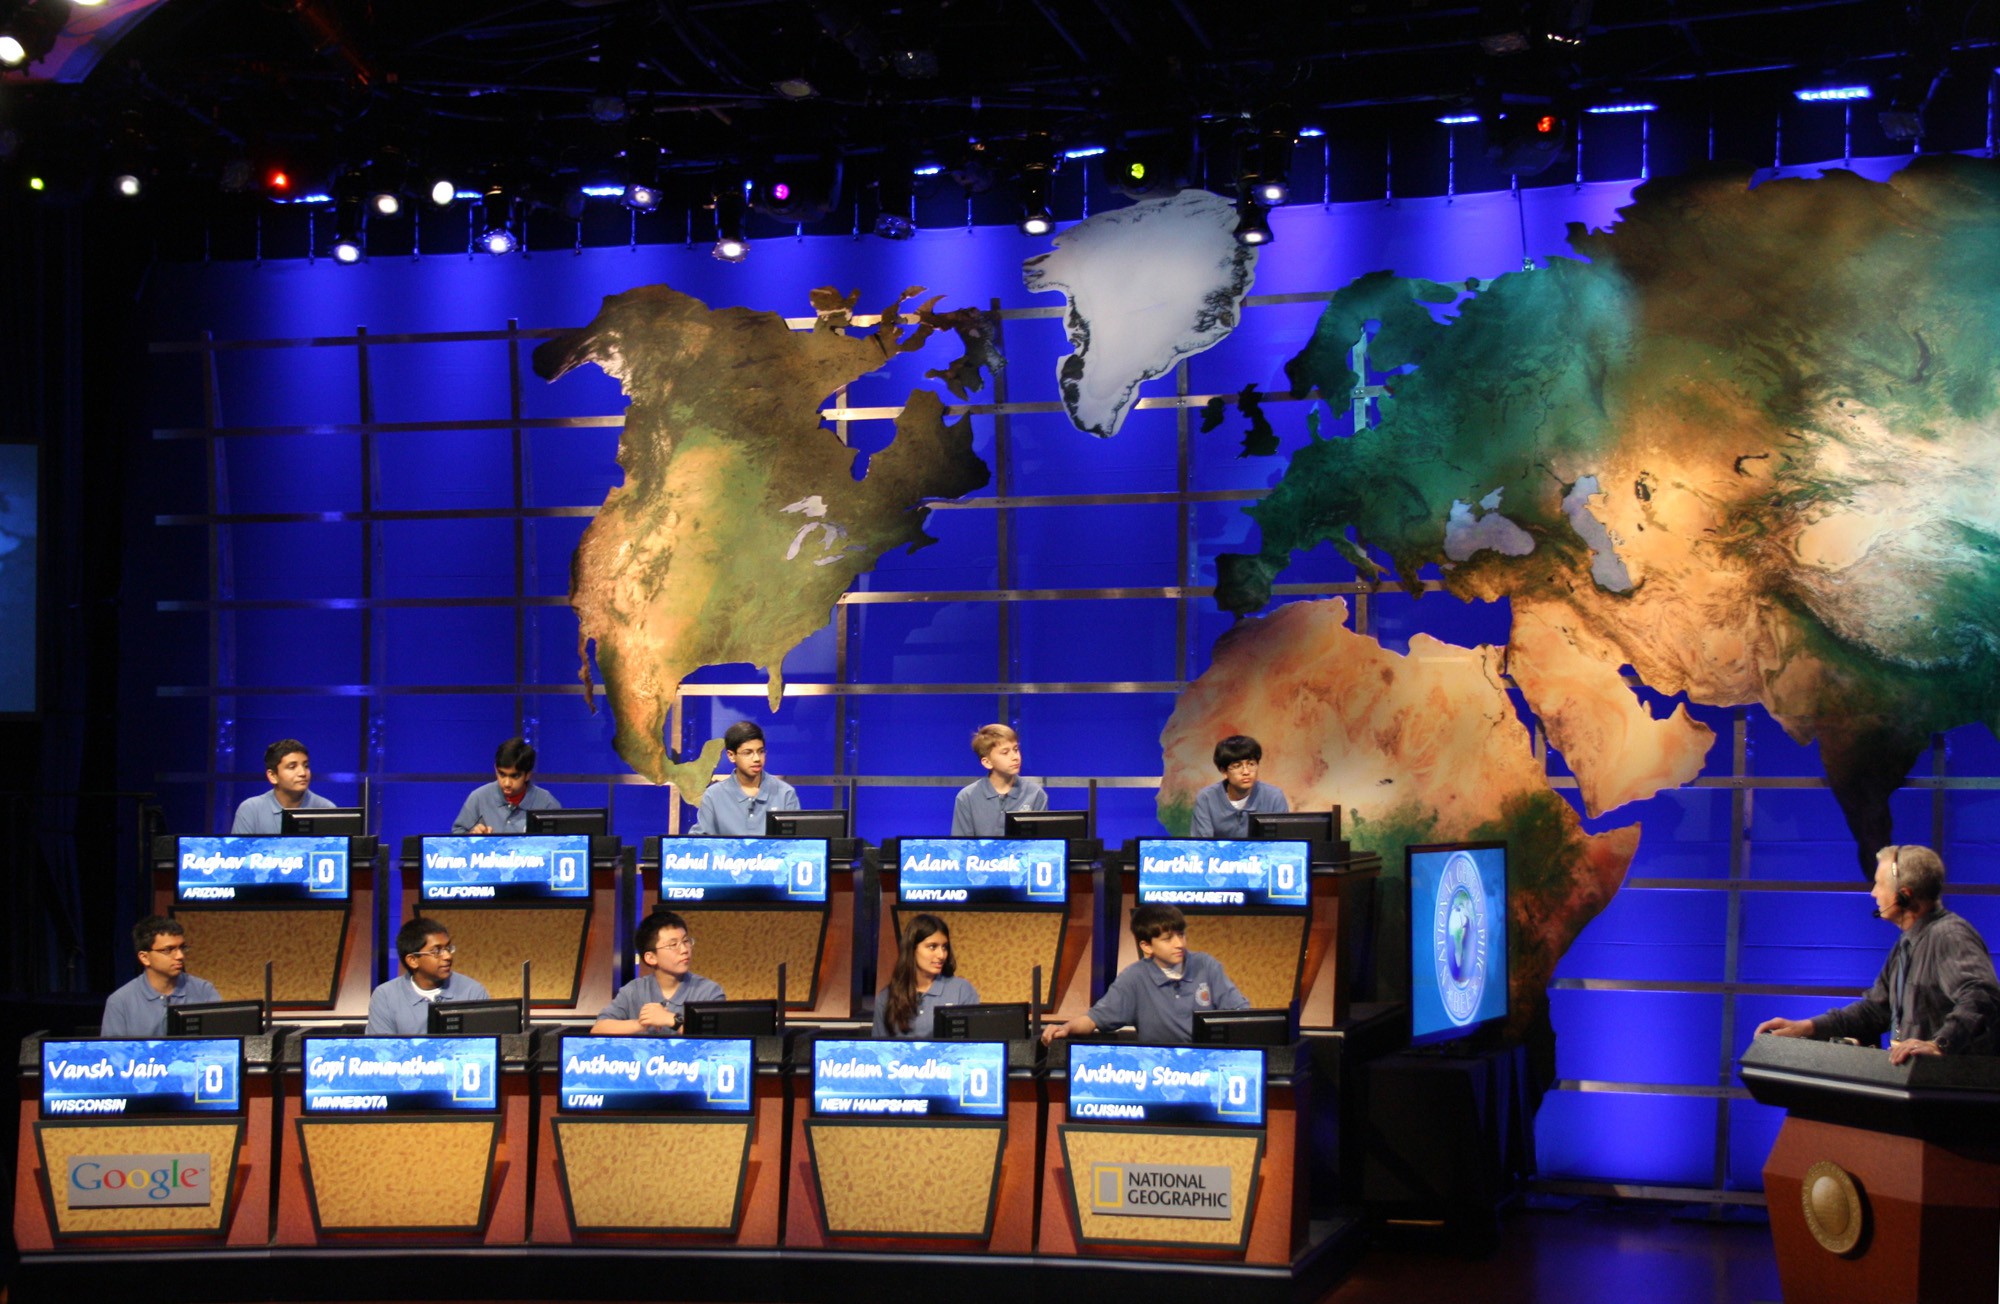 About 4 million students nationallly were winnowed down to 10 finalists, including Tucson teen Raghav Ranga, rear left, for the National Geographic Bee championship in Washington.